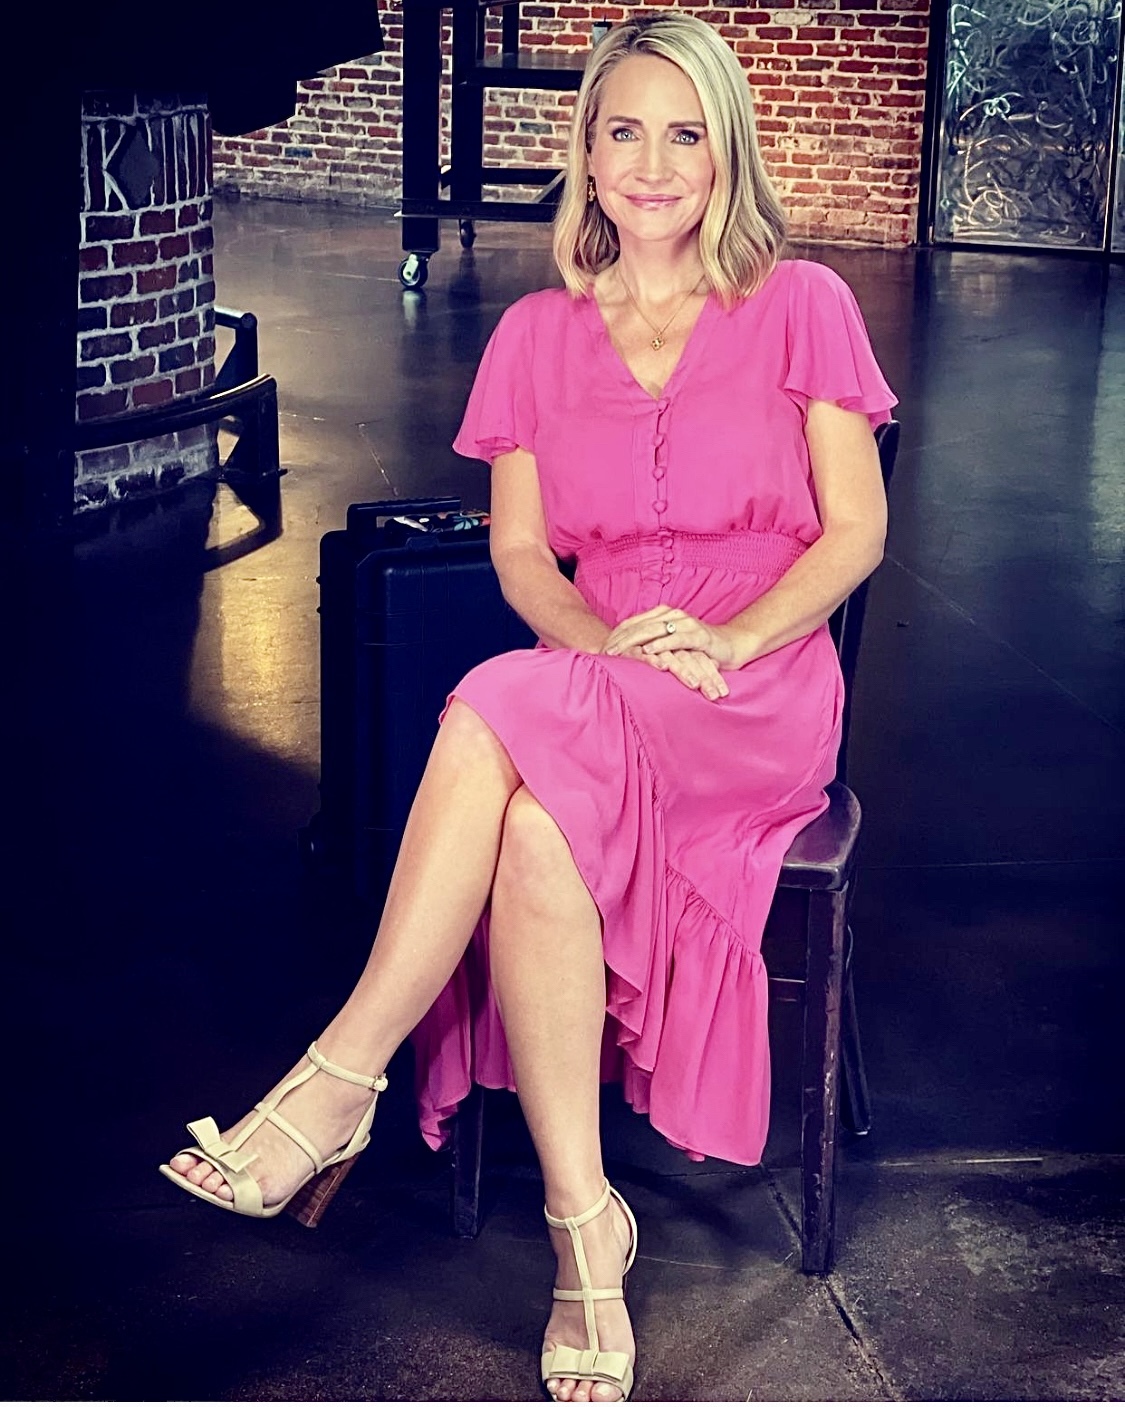 Andrea Canning's Feet - I piedi di Andrea Canning - Page: 2 ...